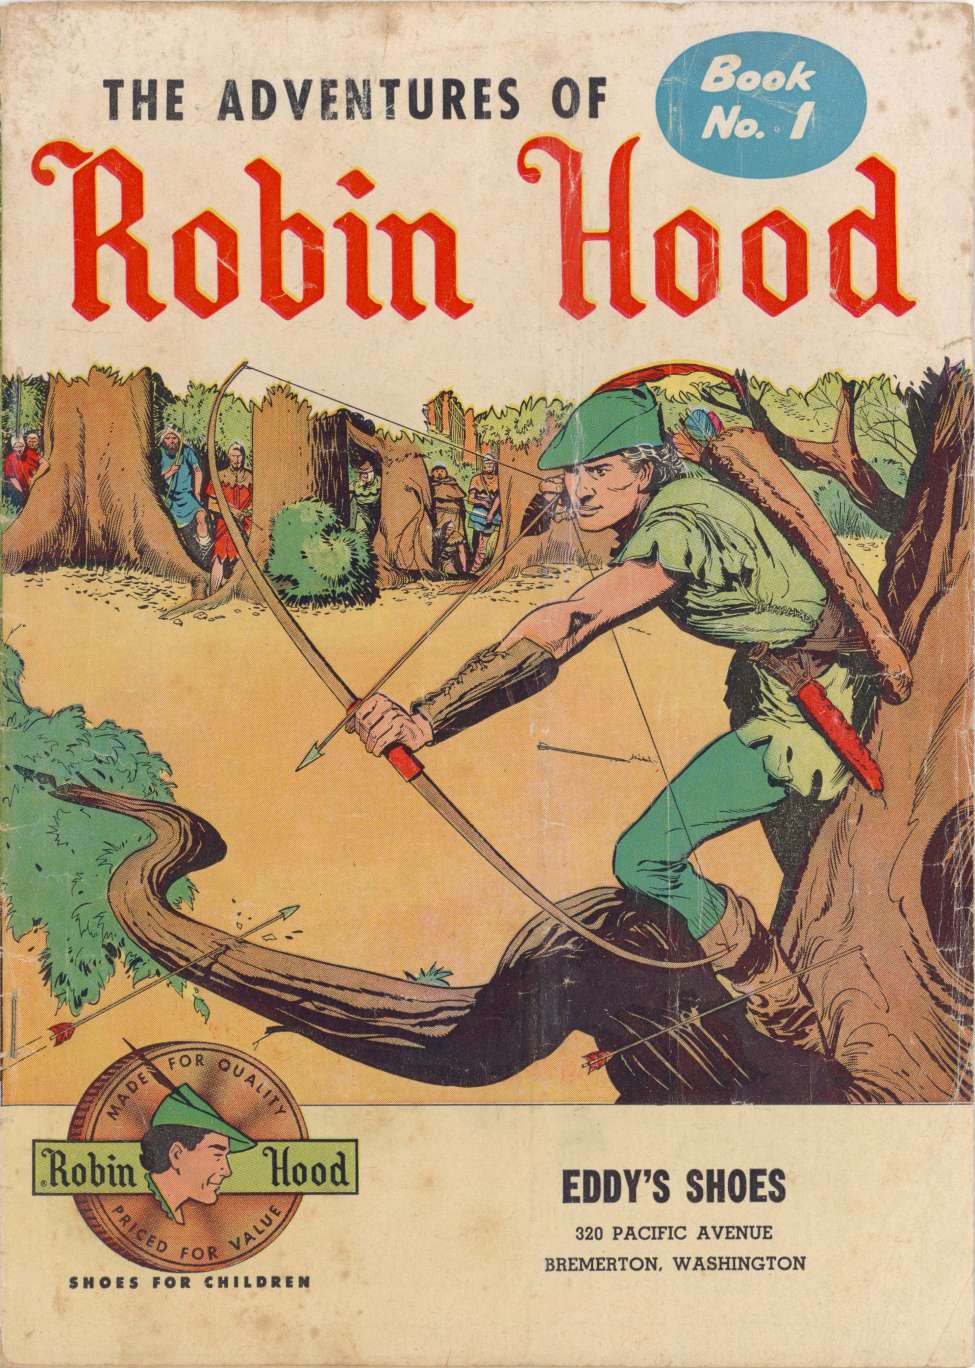 Book Cover For The Adventures of Robin Hood 1